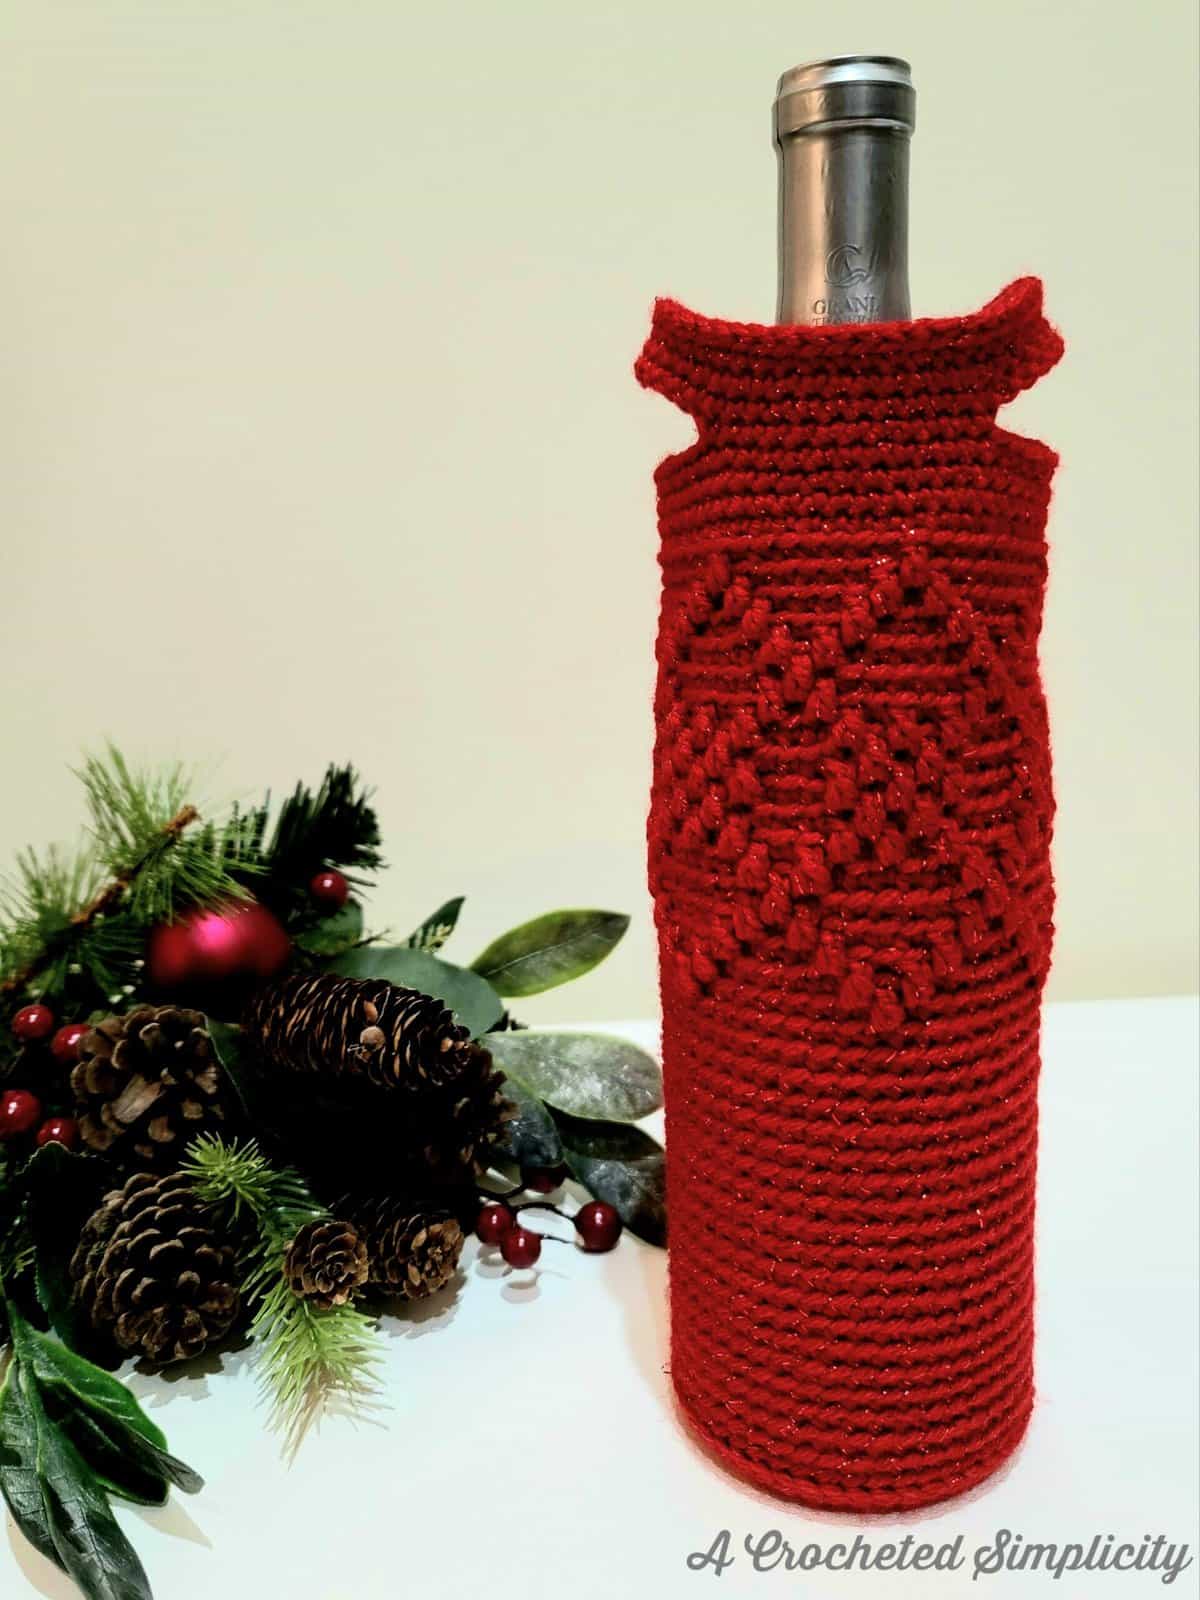 Free Crochet Wine Tote Pattern - Argyle Wine Tote by A Crocheted Simplicity. #handmadetote #handmade #christmaswinetote #crochetwinetote #crochetargyle #freecrochetpattern